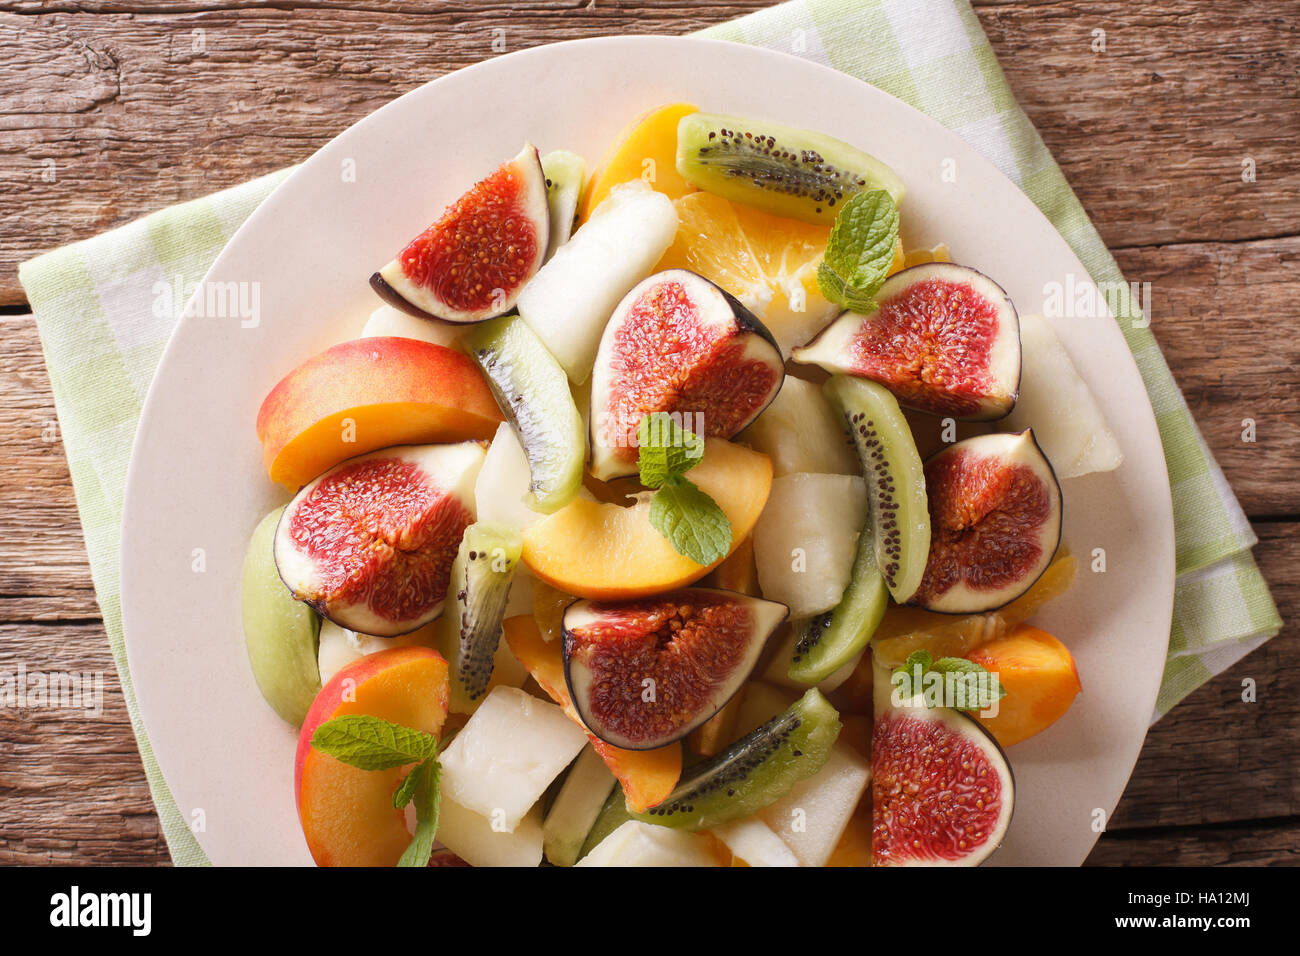 Sliced fresh fruit: figs, peaches, melons, kiwi and orange close-up on a plate. Horizontal view from above Stock Photo